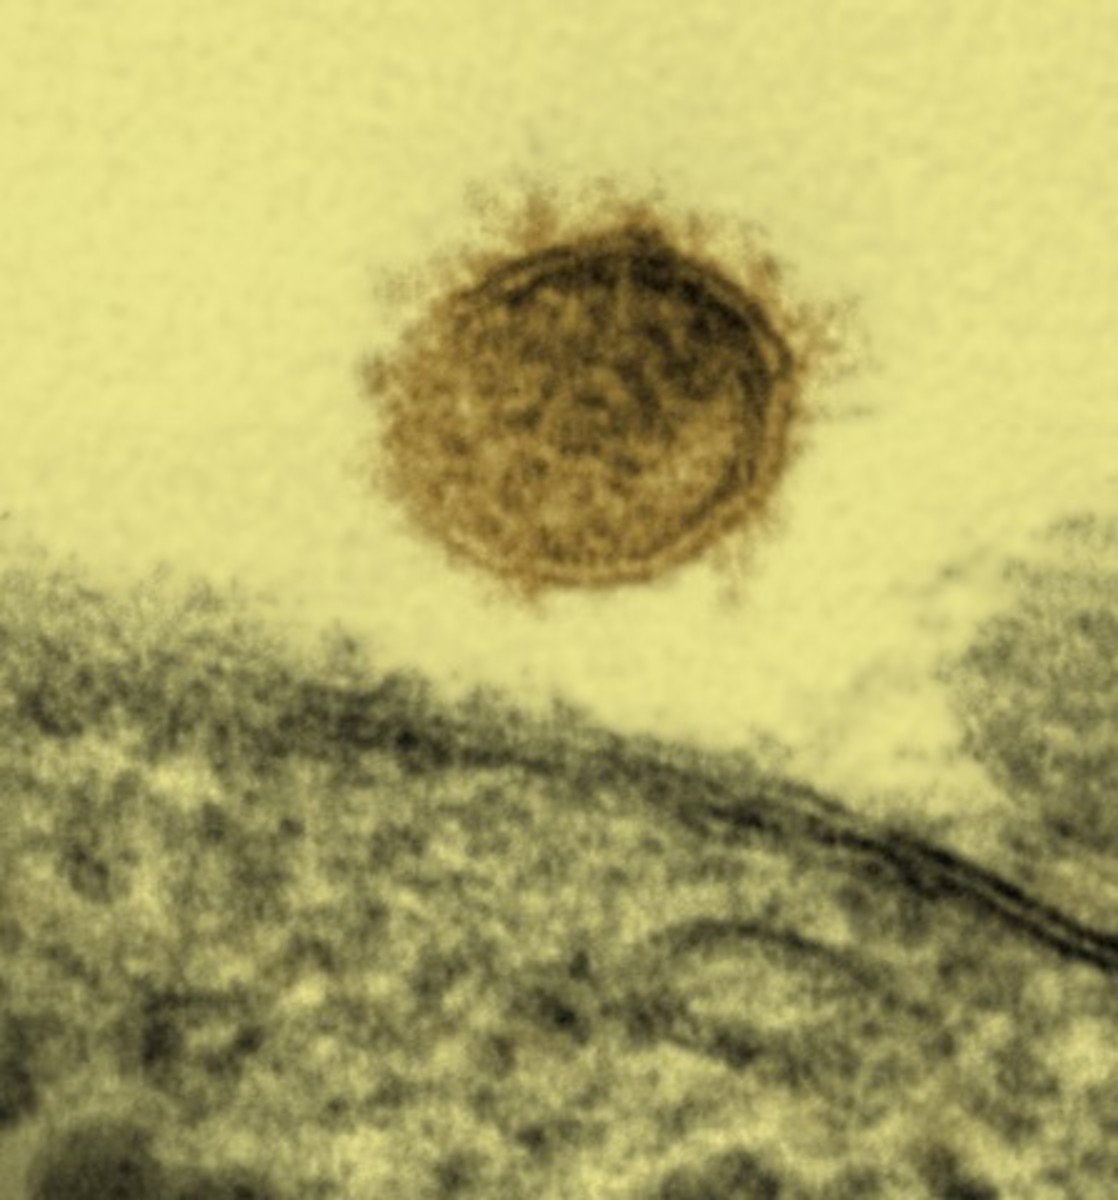 A Sin Nombre virus particle shown budding from a Vero cell. This virus causes hantavirus pulmonary syndrome in North America. Credit: NIAID